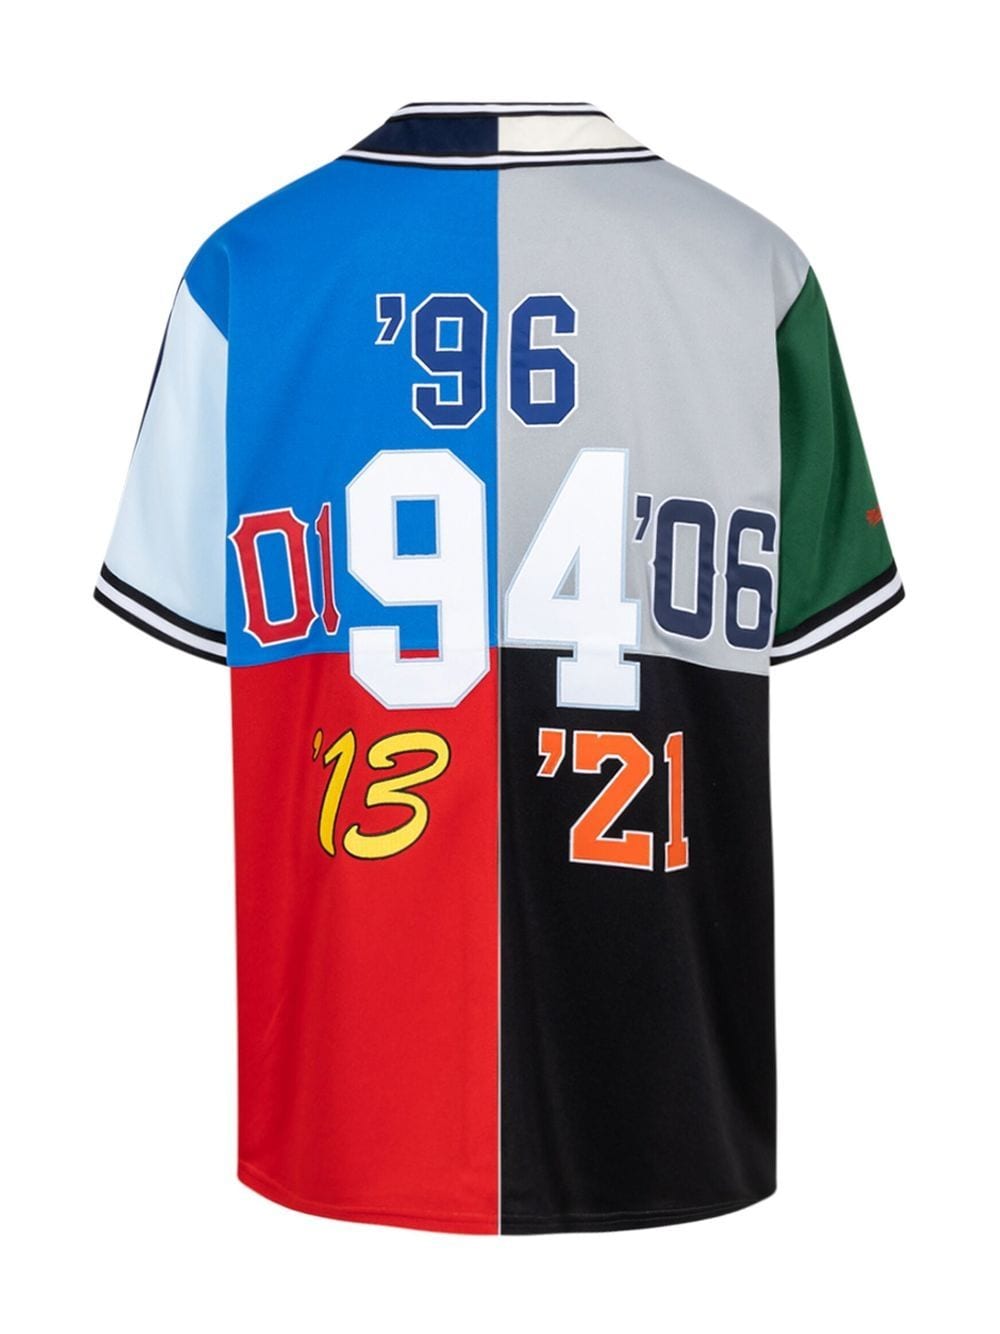 Supreme®/Mitchell & Ness® Patchwork Baseball Jersey - Fall/Winter 2021  Preview – Supreme